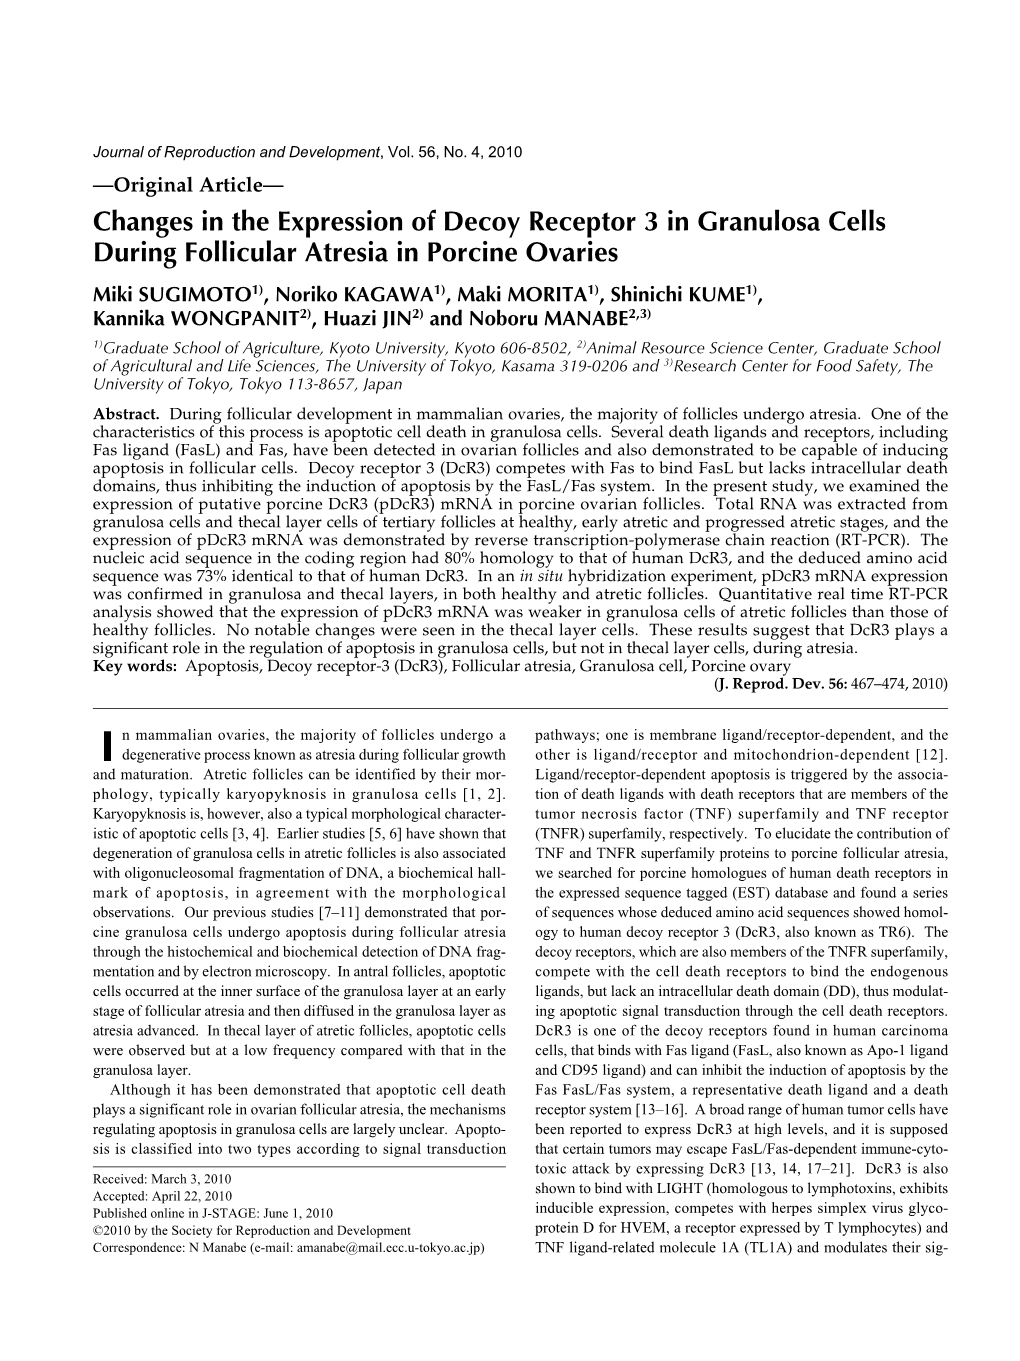 Changes in the Expression of Decoy Receptor 3 in Granulosa Cells